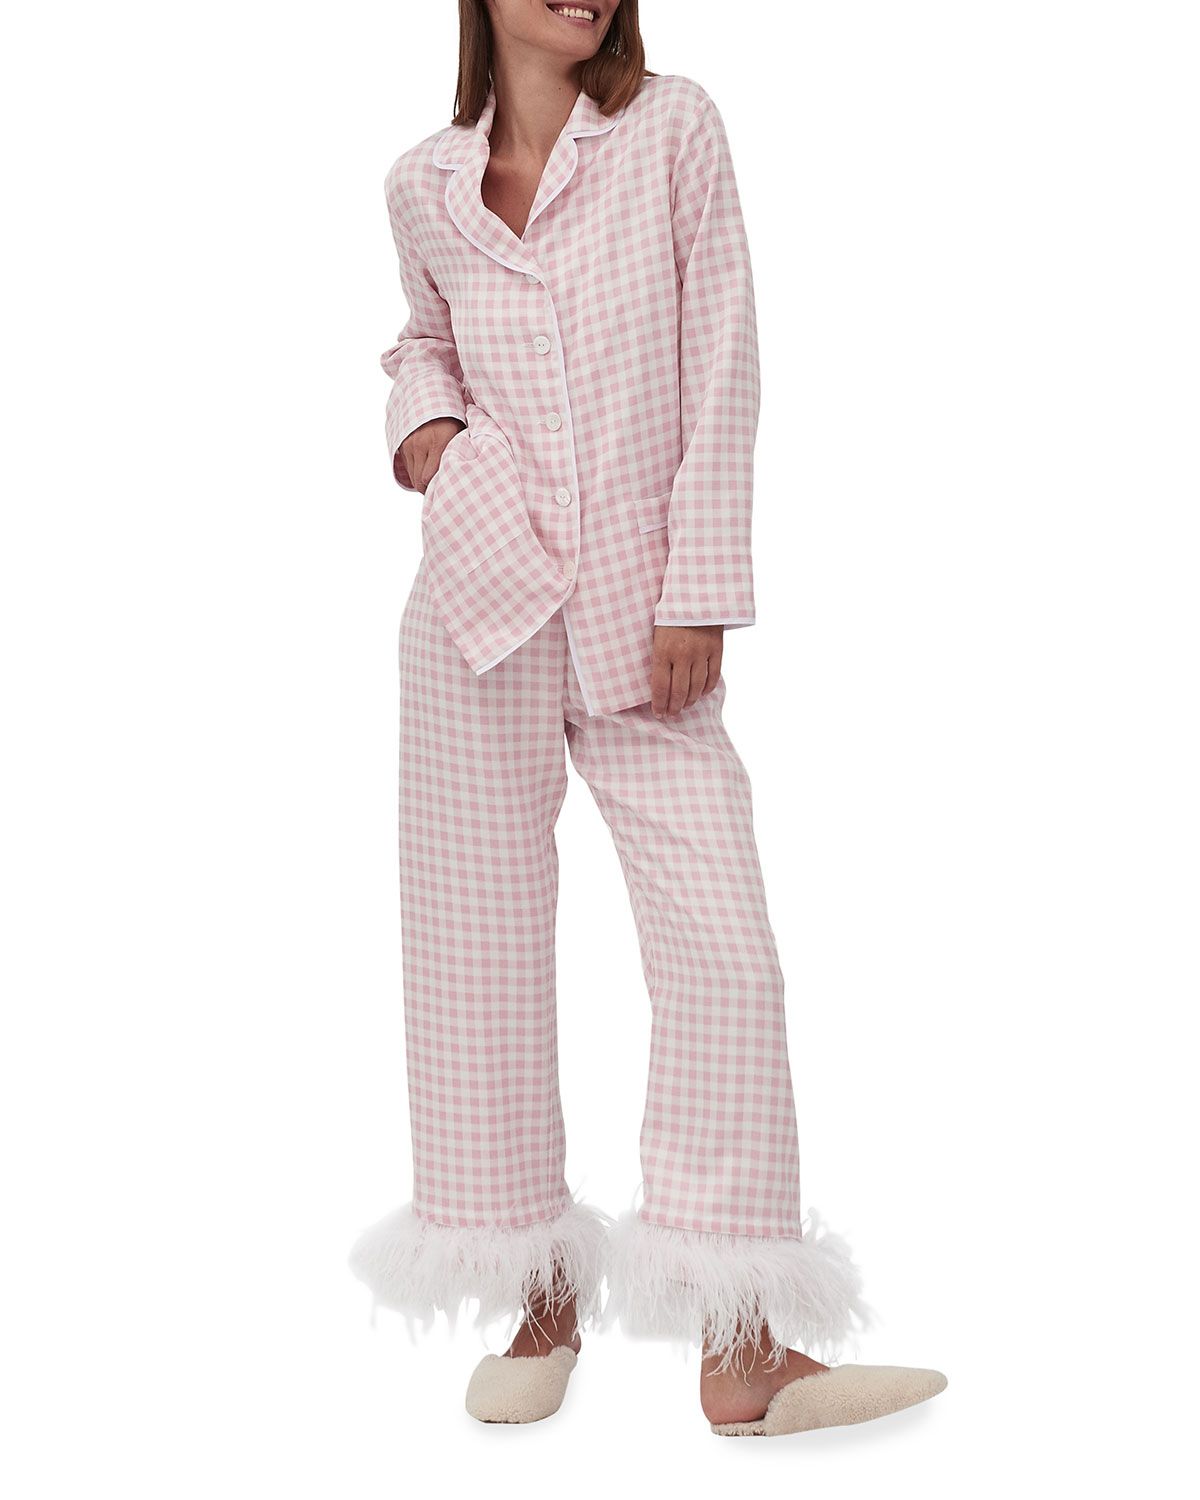 Gingham Party Pajama Set with Feathers | Neiman Marcus